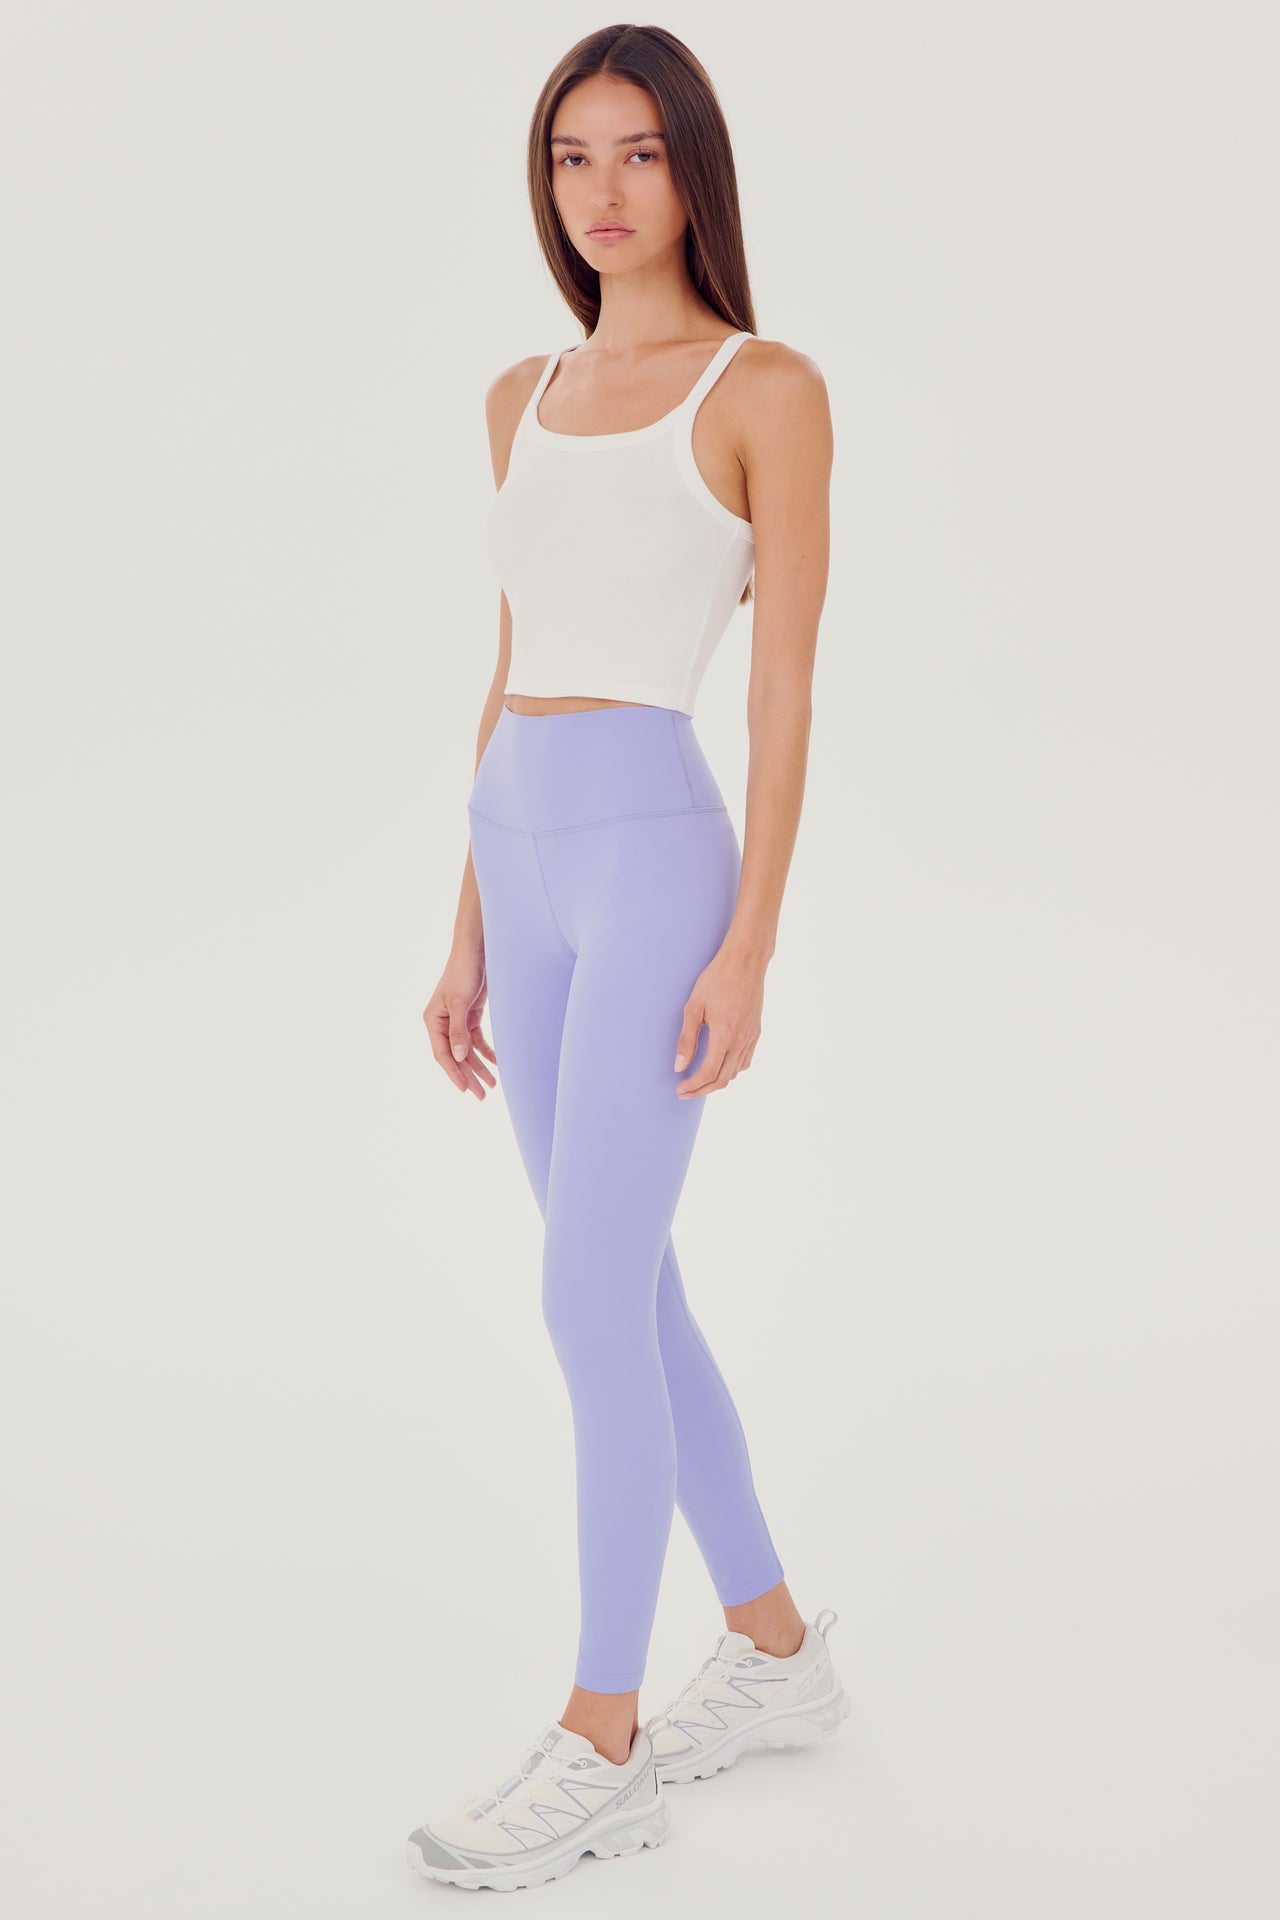 Front full view of woman with dark straight hair wearing light purple high waist leggings with white cropped tank and white shoes